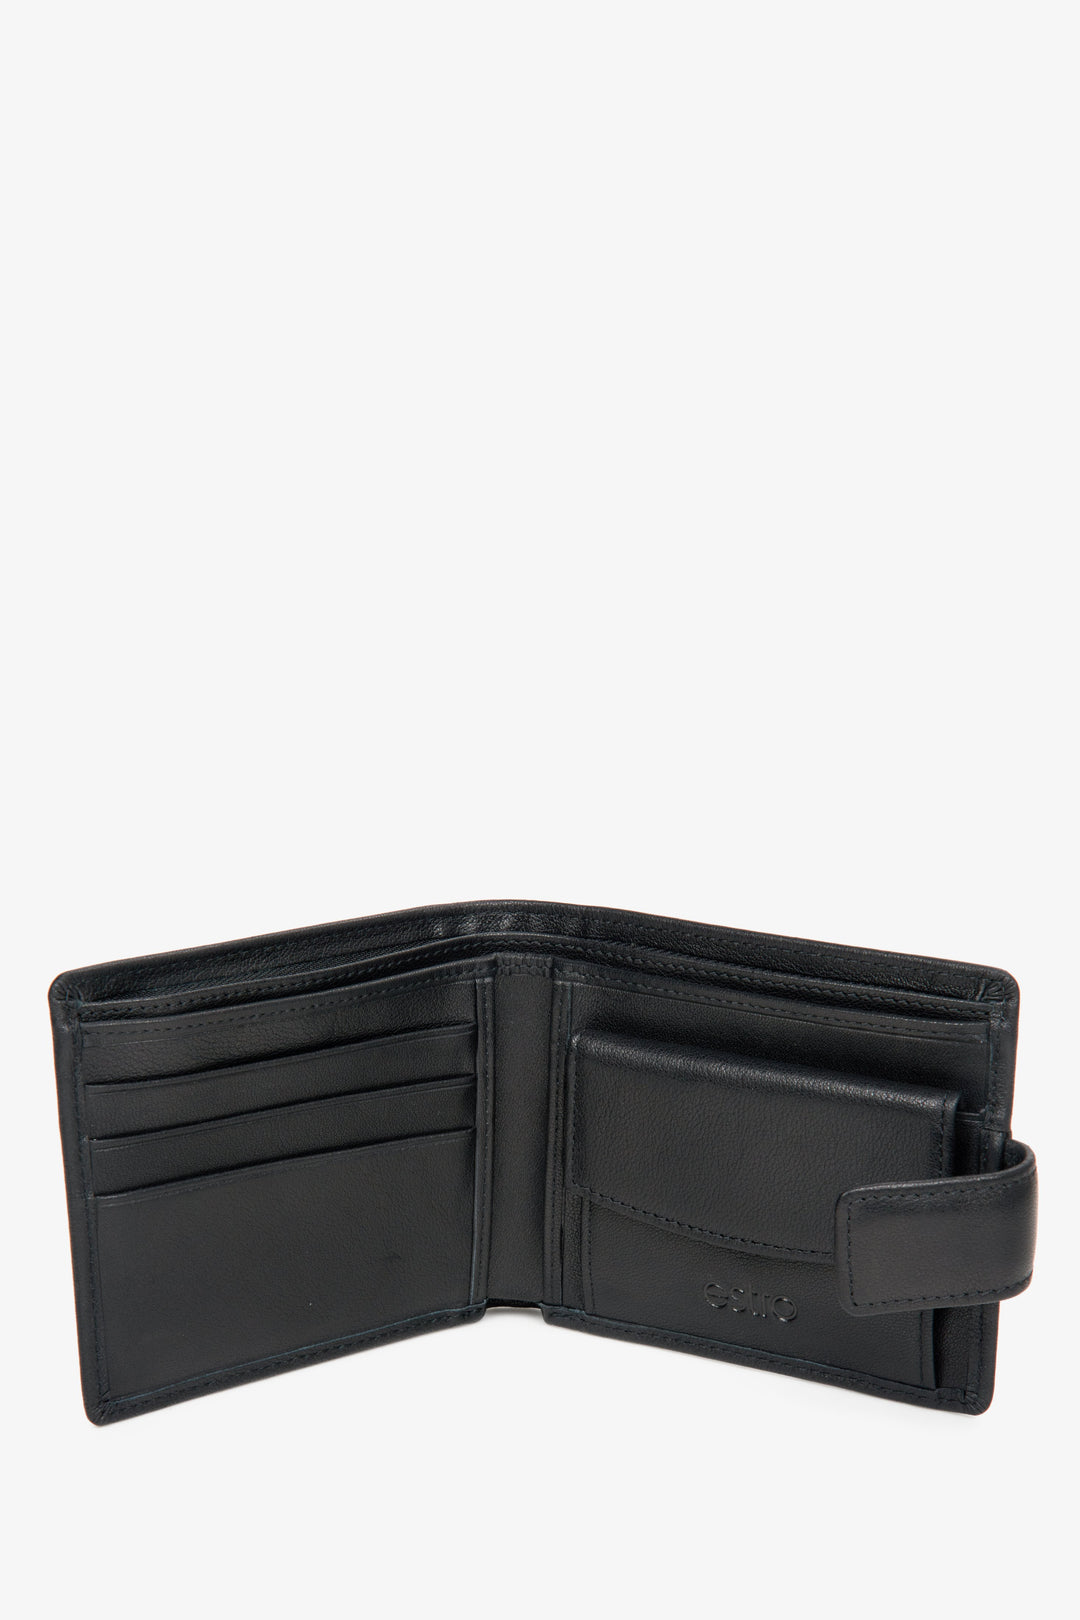 The interior of the black leather men's wallet with a buckle by Estro.